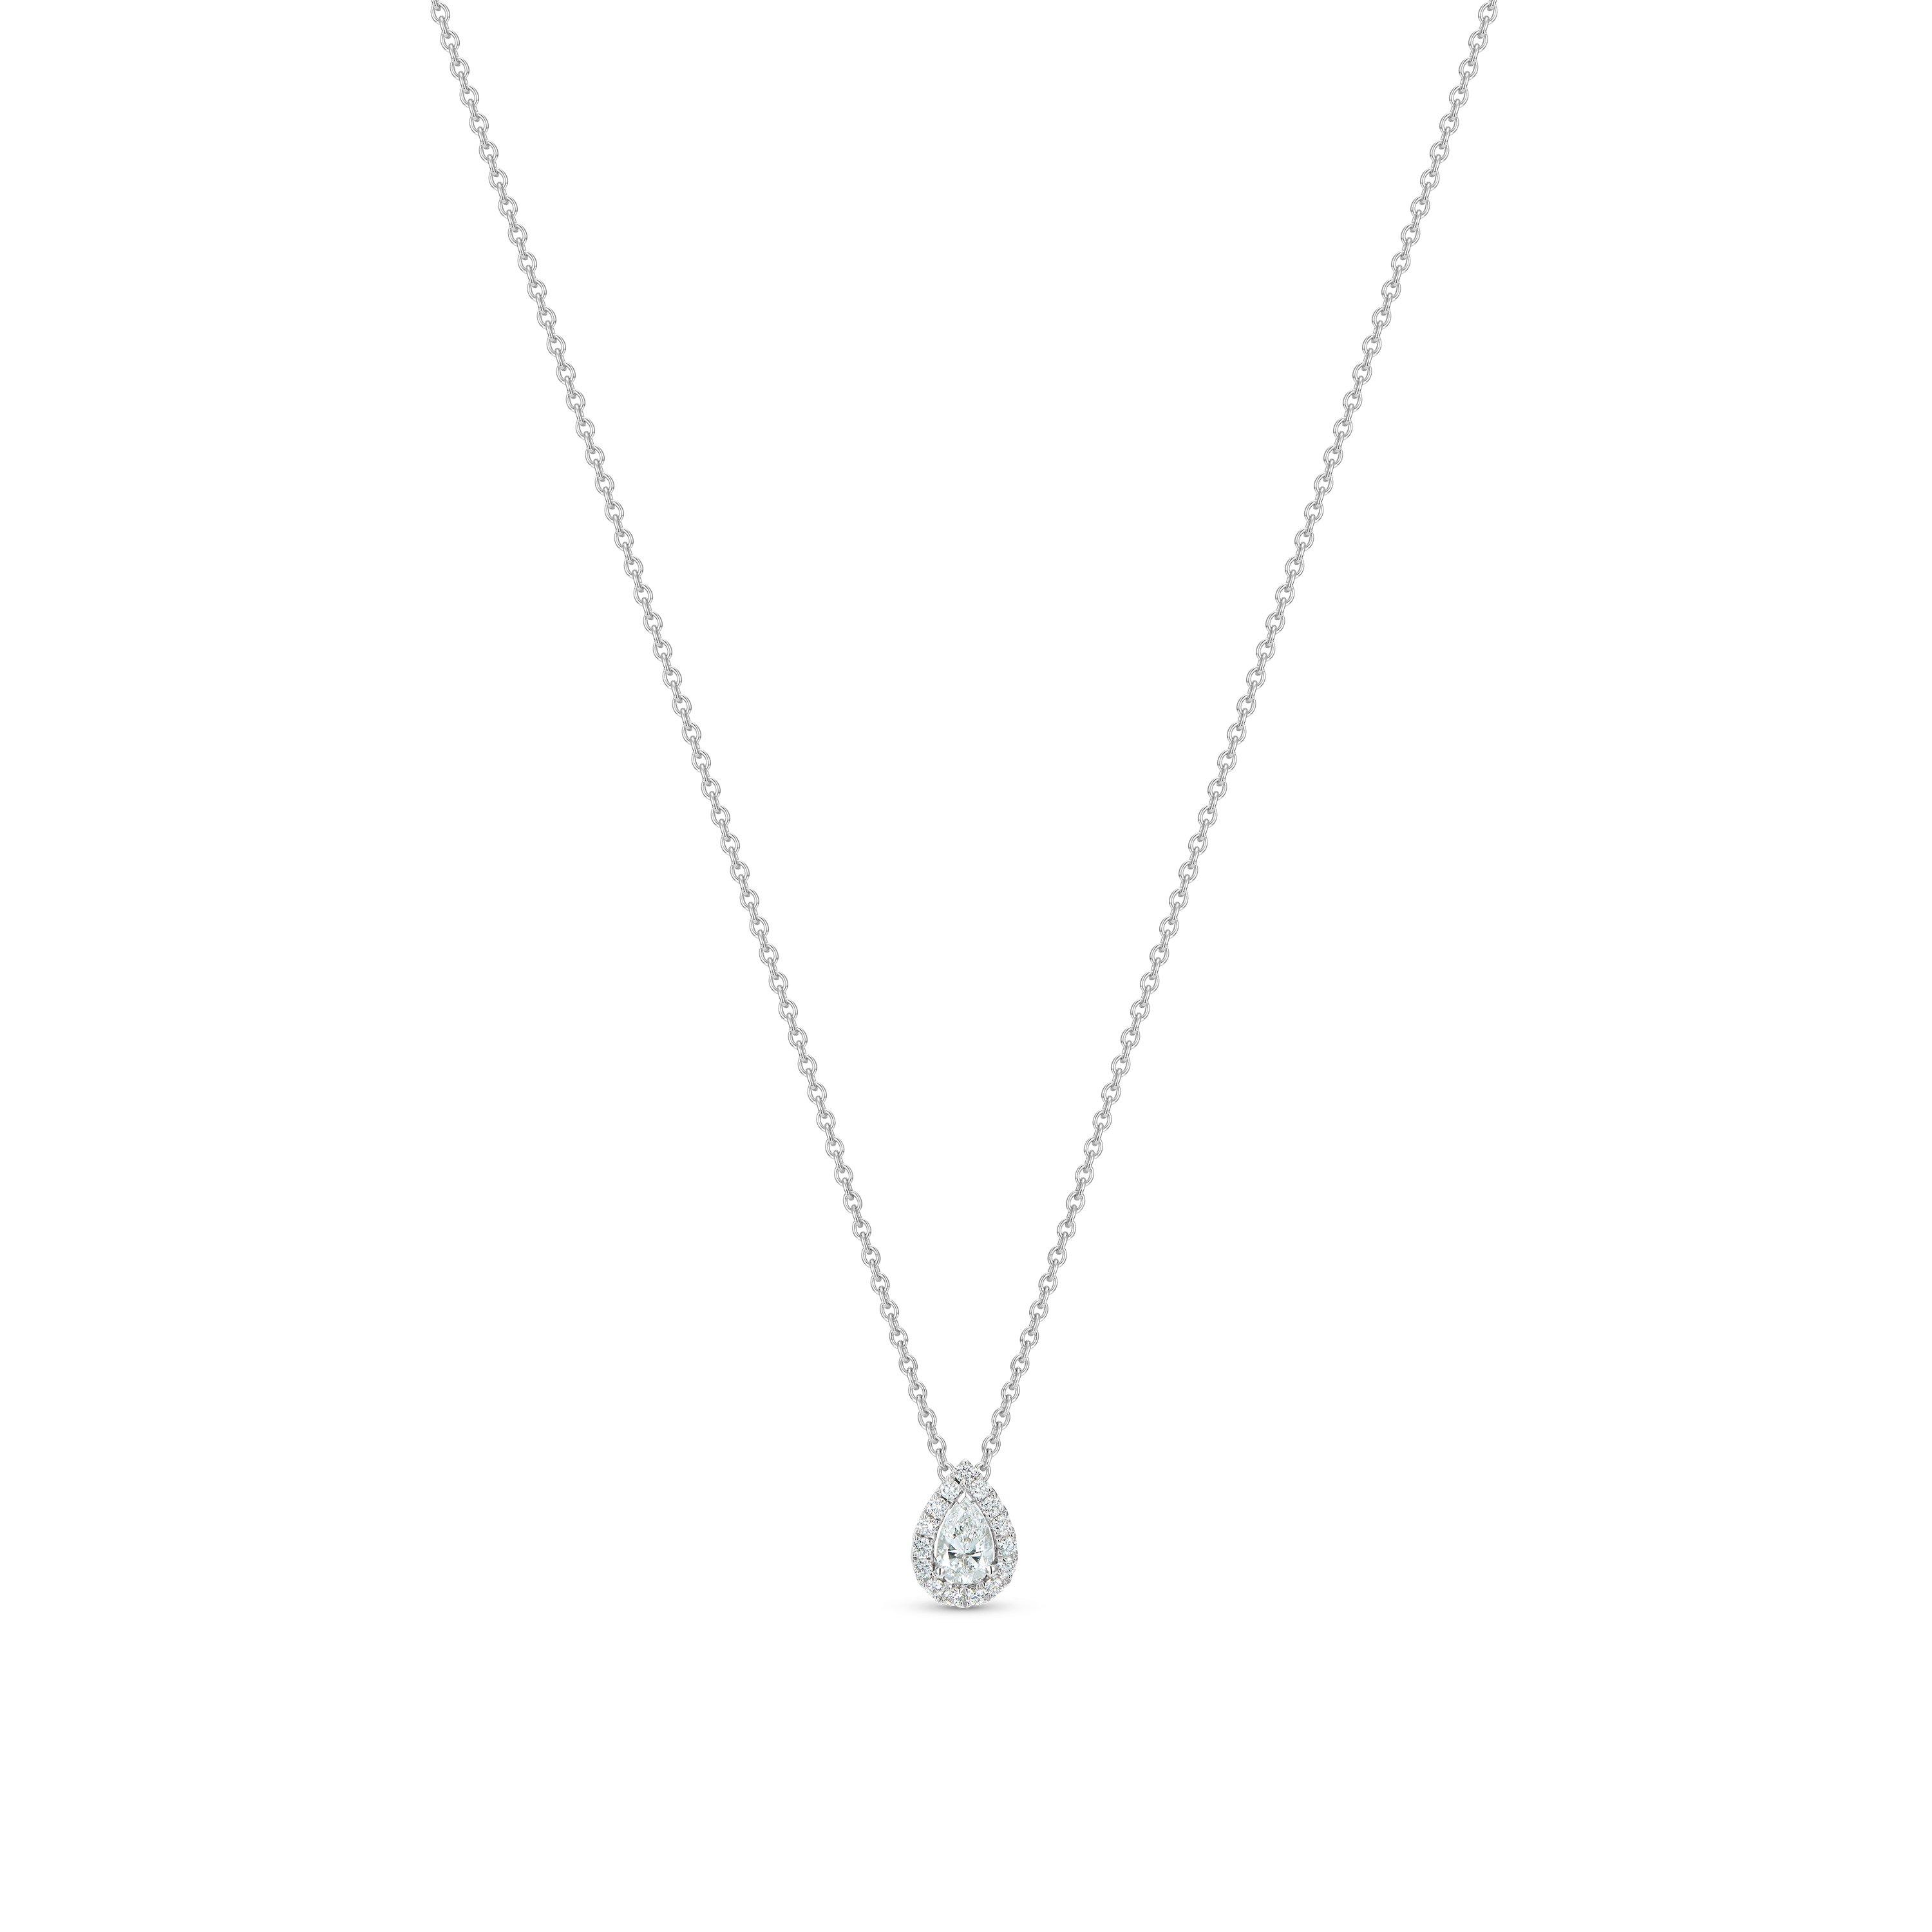 de Beers Jewellers 18kt White Gold My First de Beers Aura Pear-Shaped Diamond Pendant Necklace